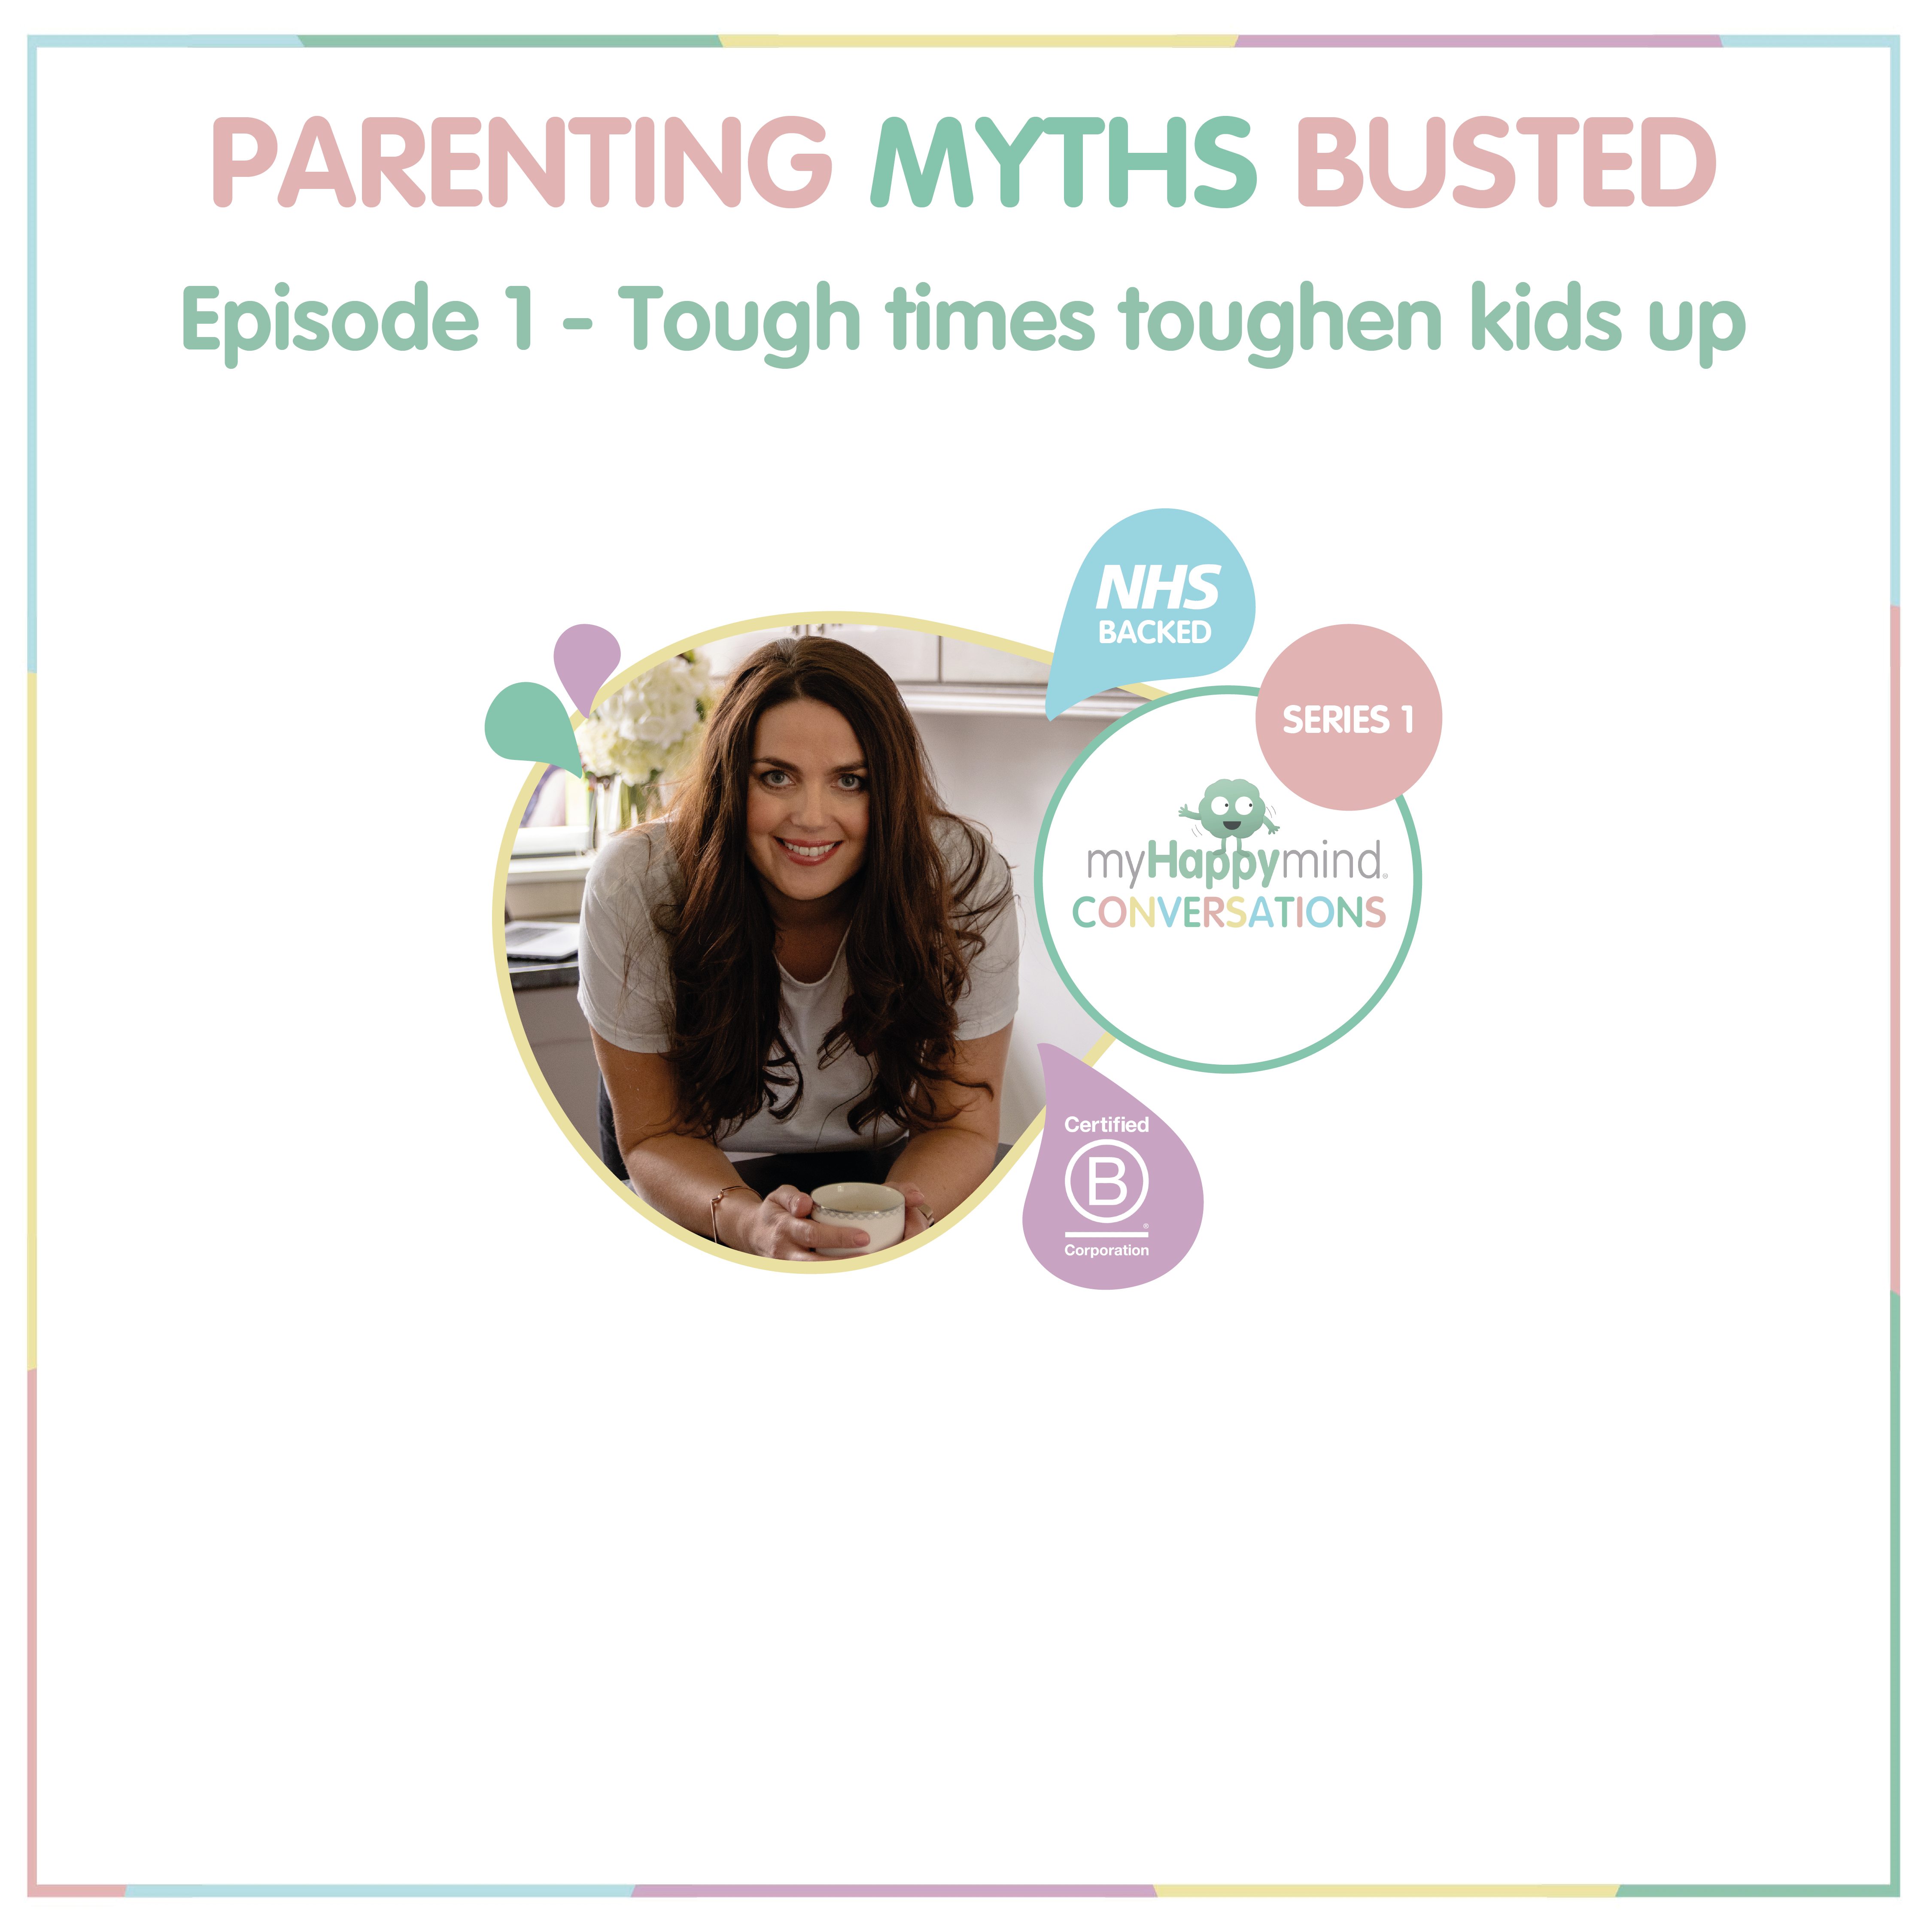 myHappymind - Mental Health and wellbeing podcast for families and schools about parenting myths. This episode is focusing on if tough times help to toughen up our kids.